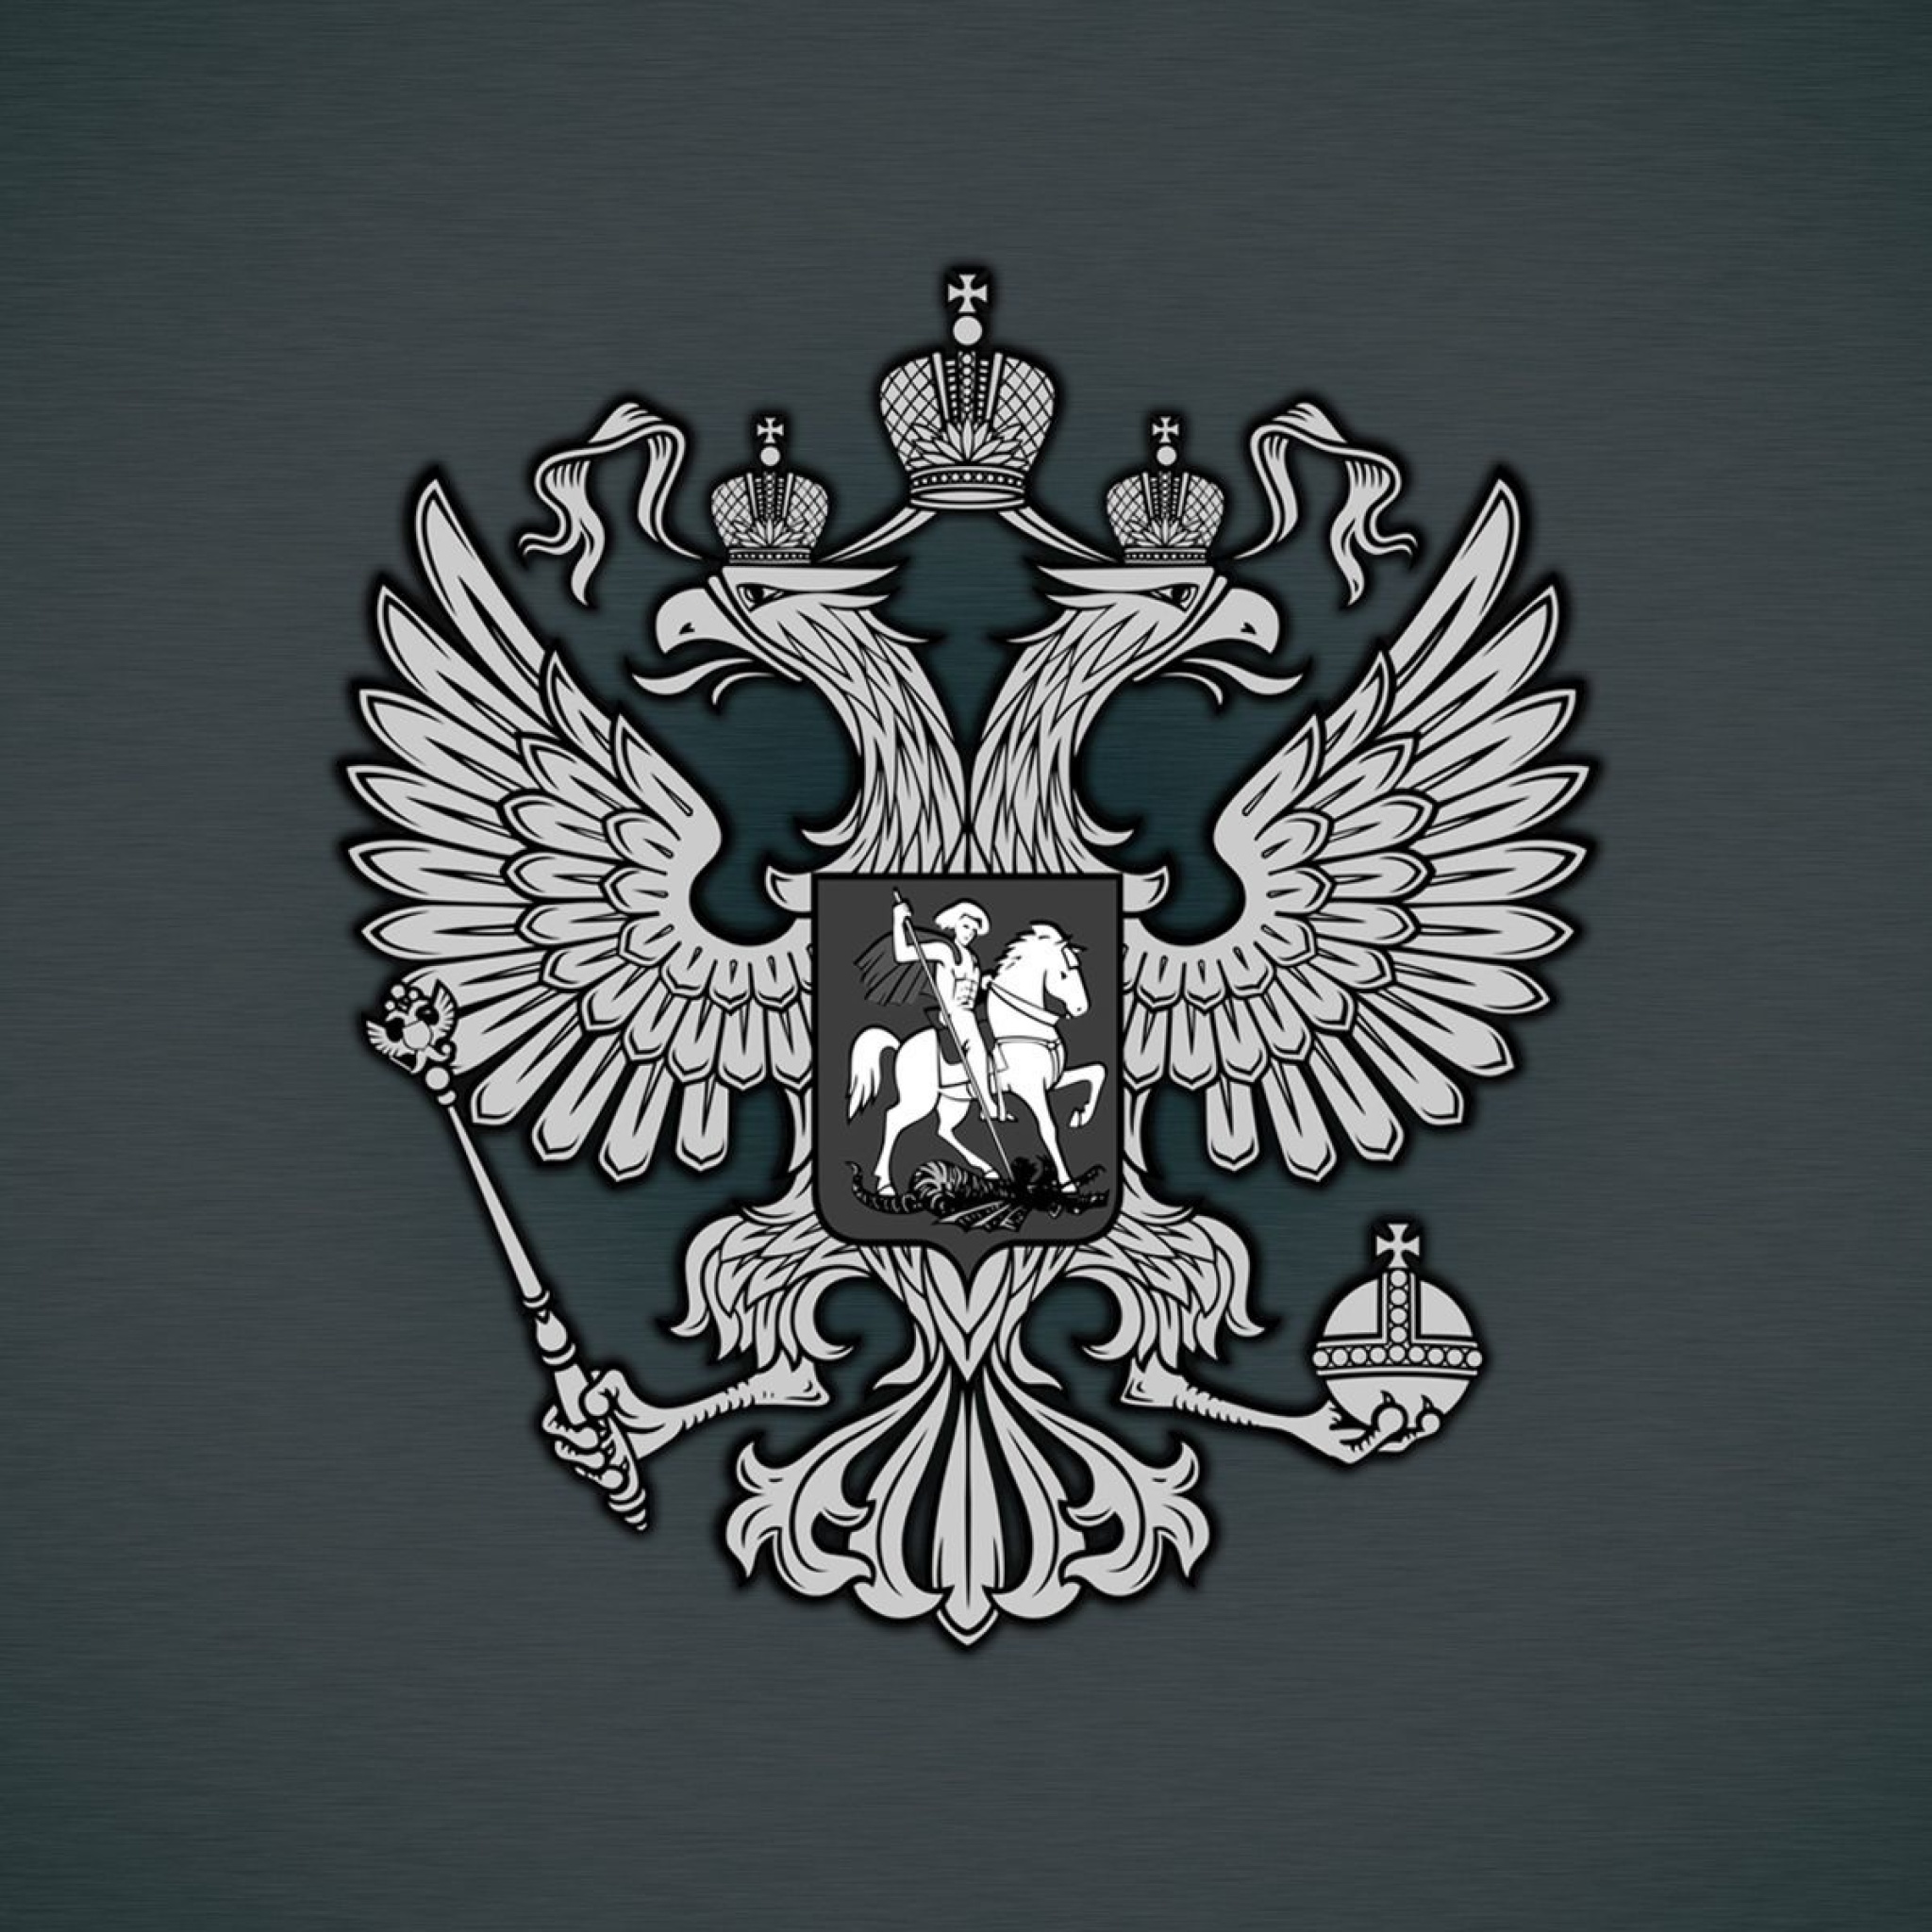 Das Coat of arms of Russia Wallpaper 2048x2048